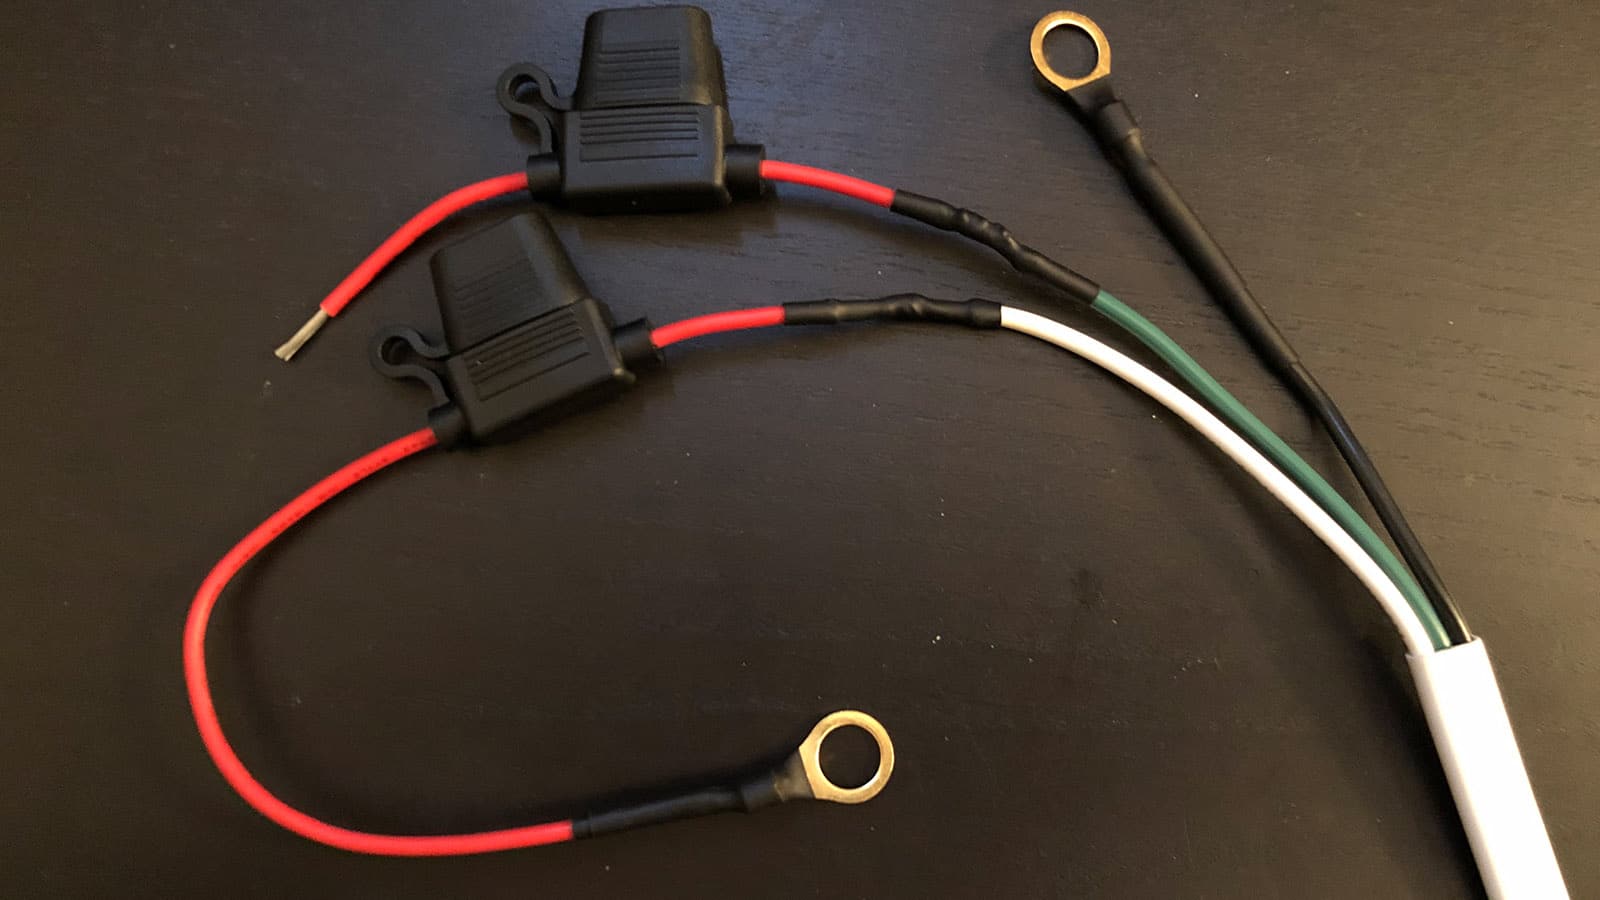 Positive and negative wires with battery terminal connections soldered